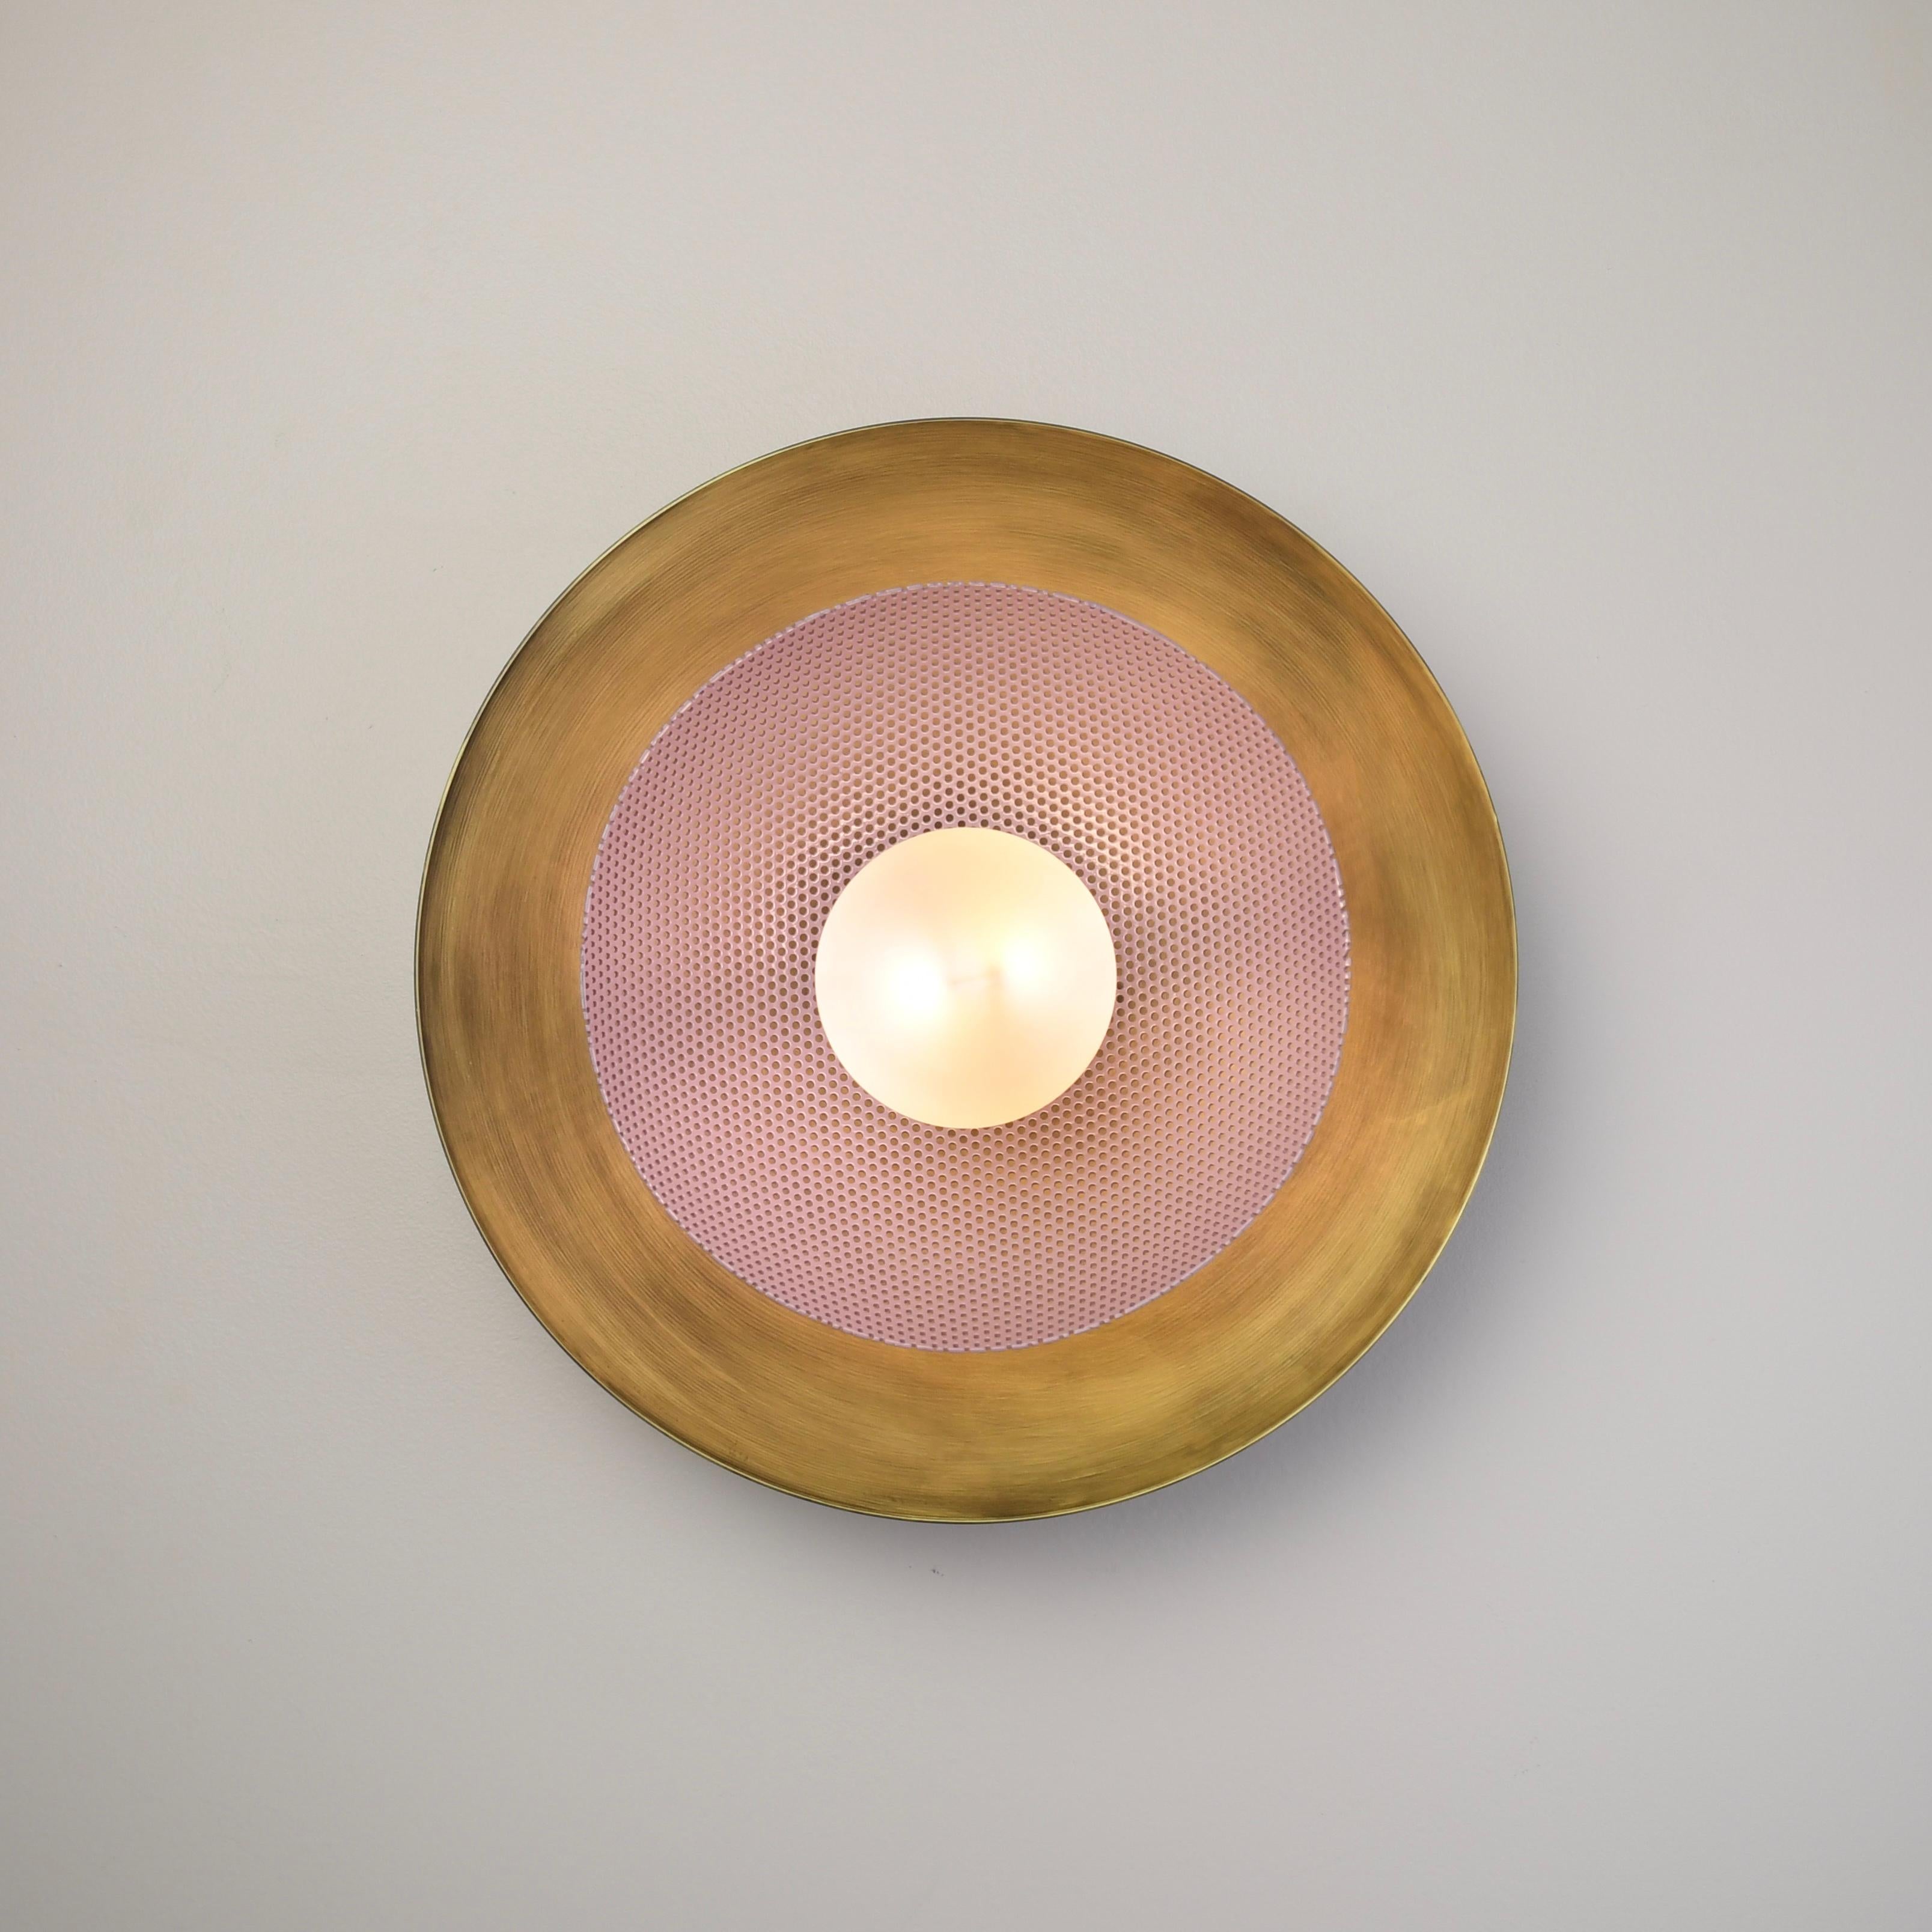 The Centric wall sconce is a stately take on French modernism, featuring a spun metal mesh shade nestled into a large solid brass bowl. Part of our Axial family of products, the Centric wall sconce is a substantial, handsome piece that works well in